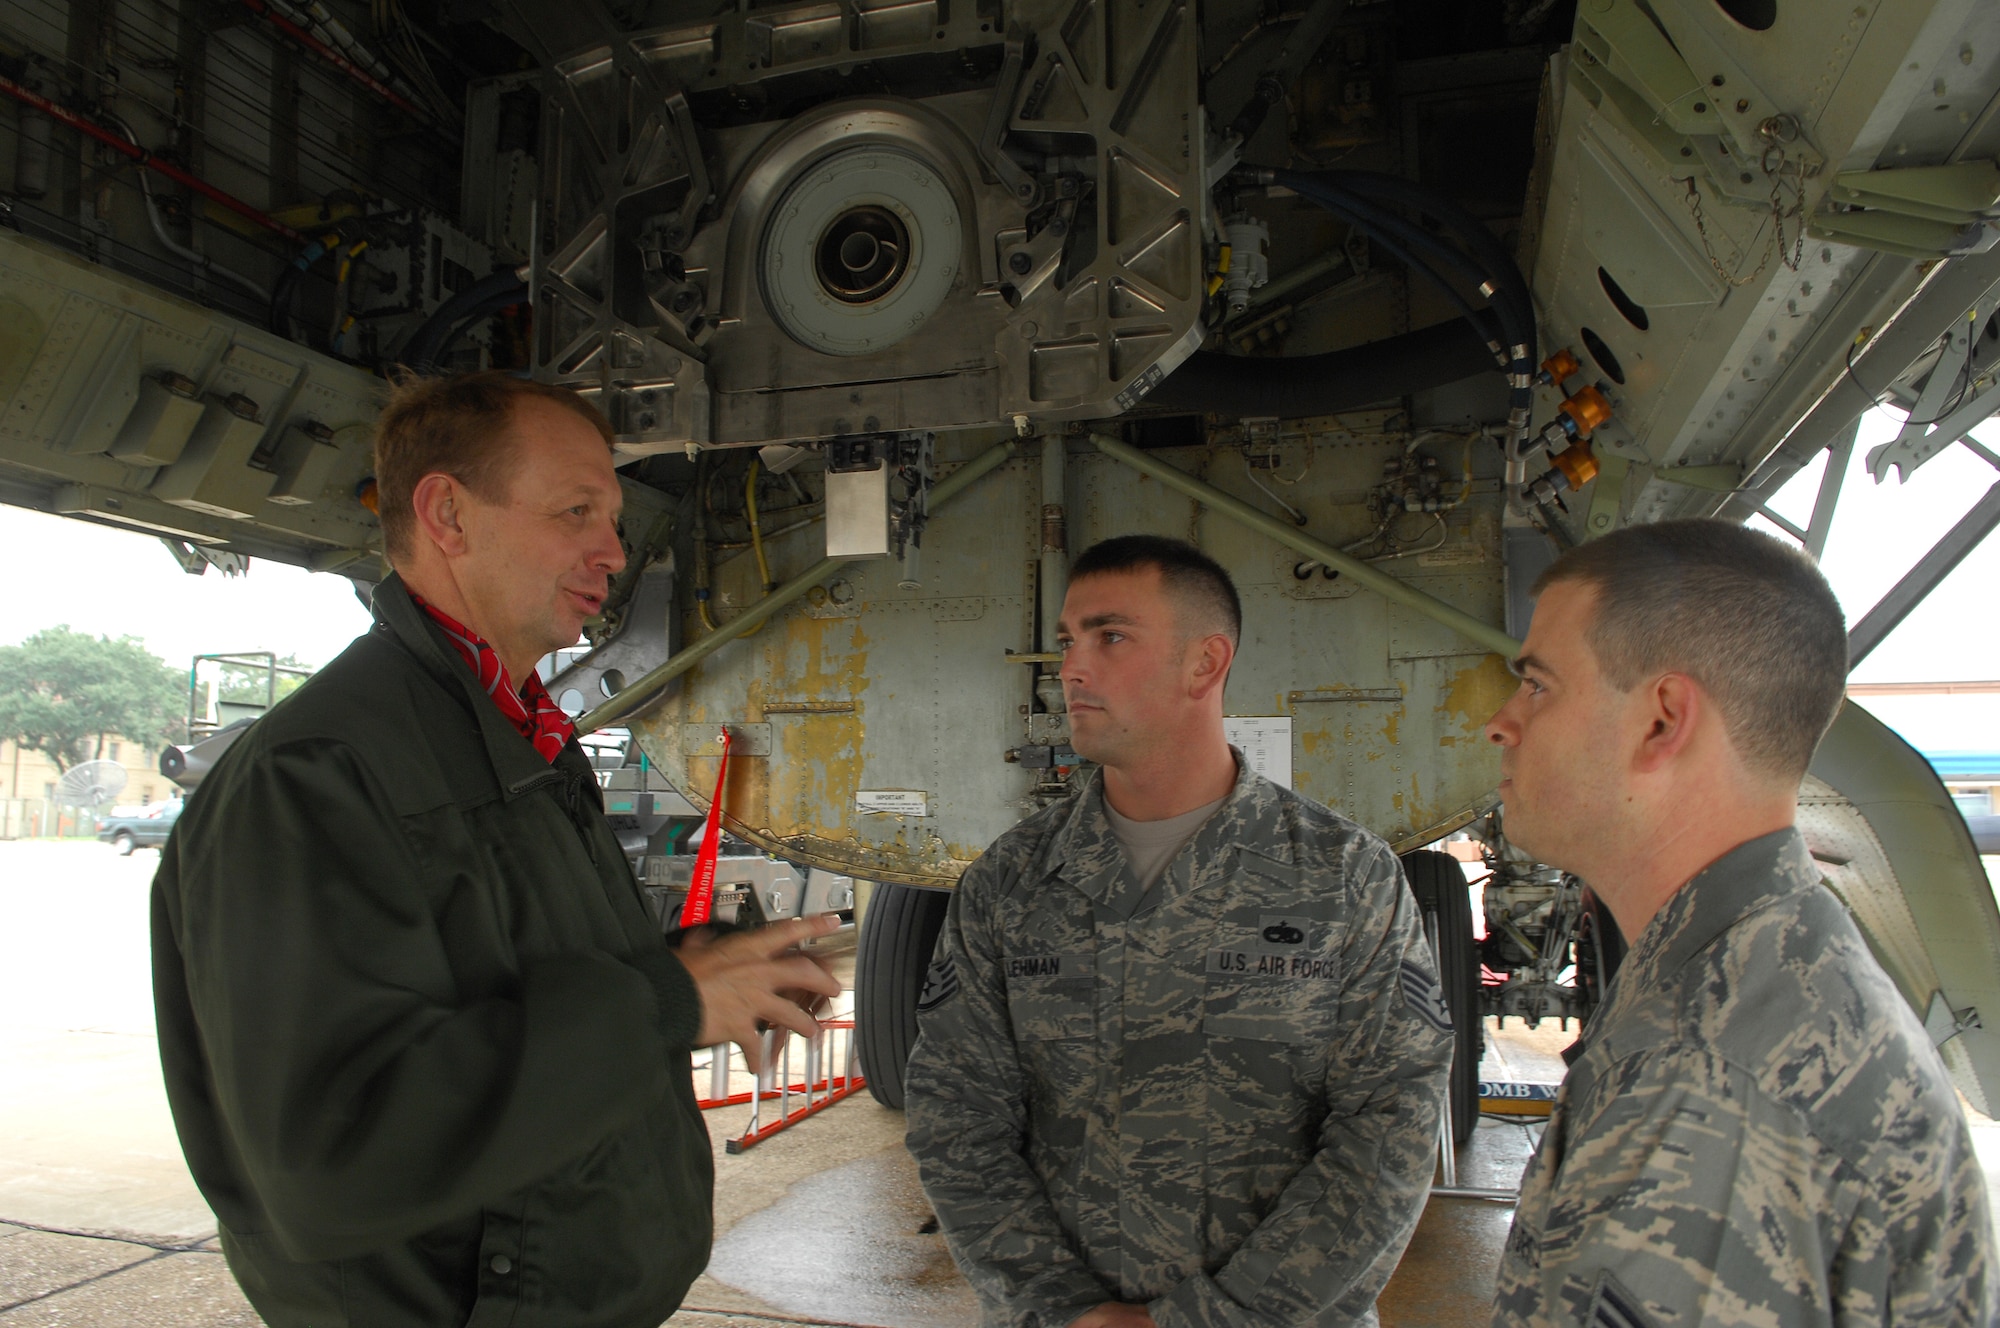 BARKSDALE AIR FORCE BASE, La. -- Lt. Gen. Paul Fouilland, French Strategic Air Forces commander-in-chief, discusses aspects of the B-52 bomber with 2nd Aircraft Maintenance Squadron crew chiefs, Staff Sgt. Matthew Lehman and Senior Airman Matthew Dennis, during his visit to Air Force Global Strike Command at Barksdale Air Force Base, La., Nov. 14 – 18.  The visit and meetings were designed to develop mutual understanding and partnering opportunities. (U.S. Air Force photo/Master Sgt. Corey A. Clements)